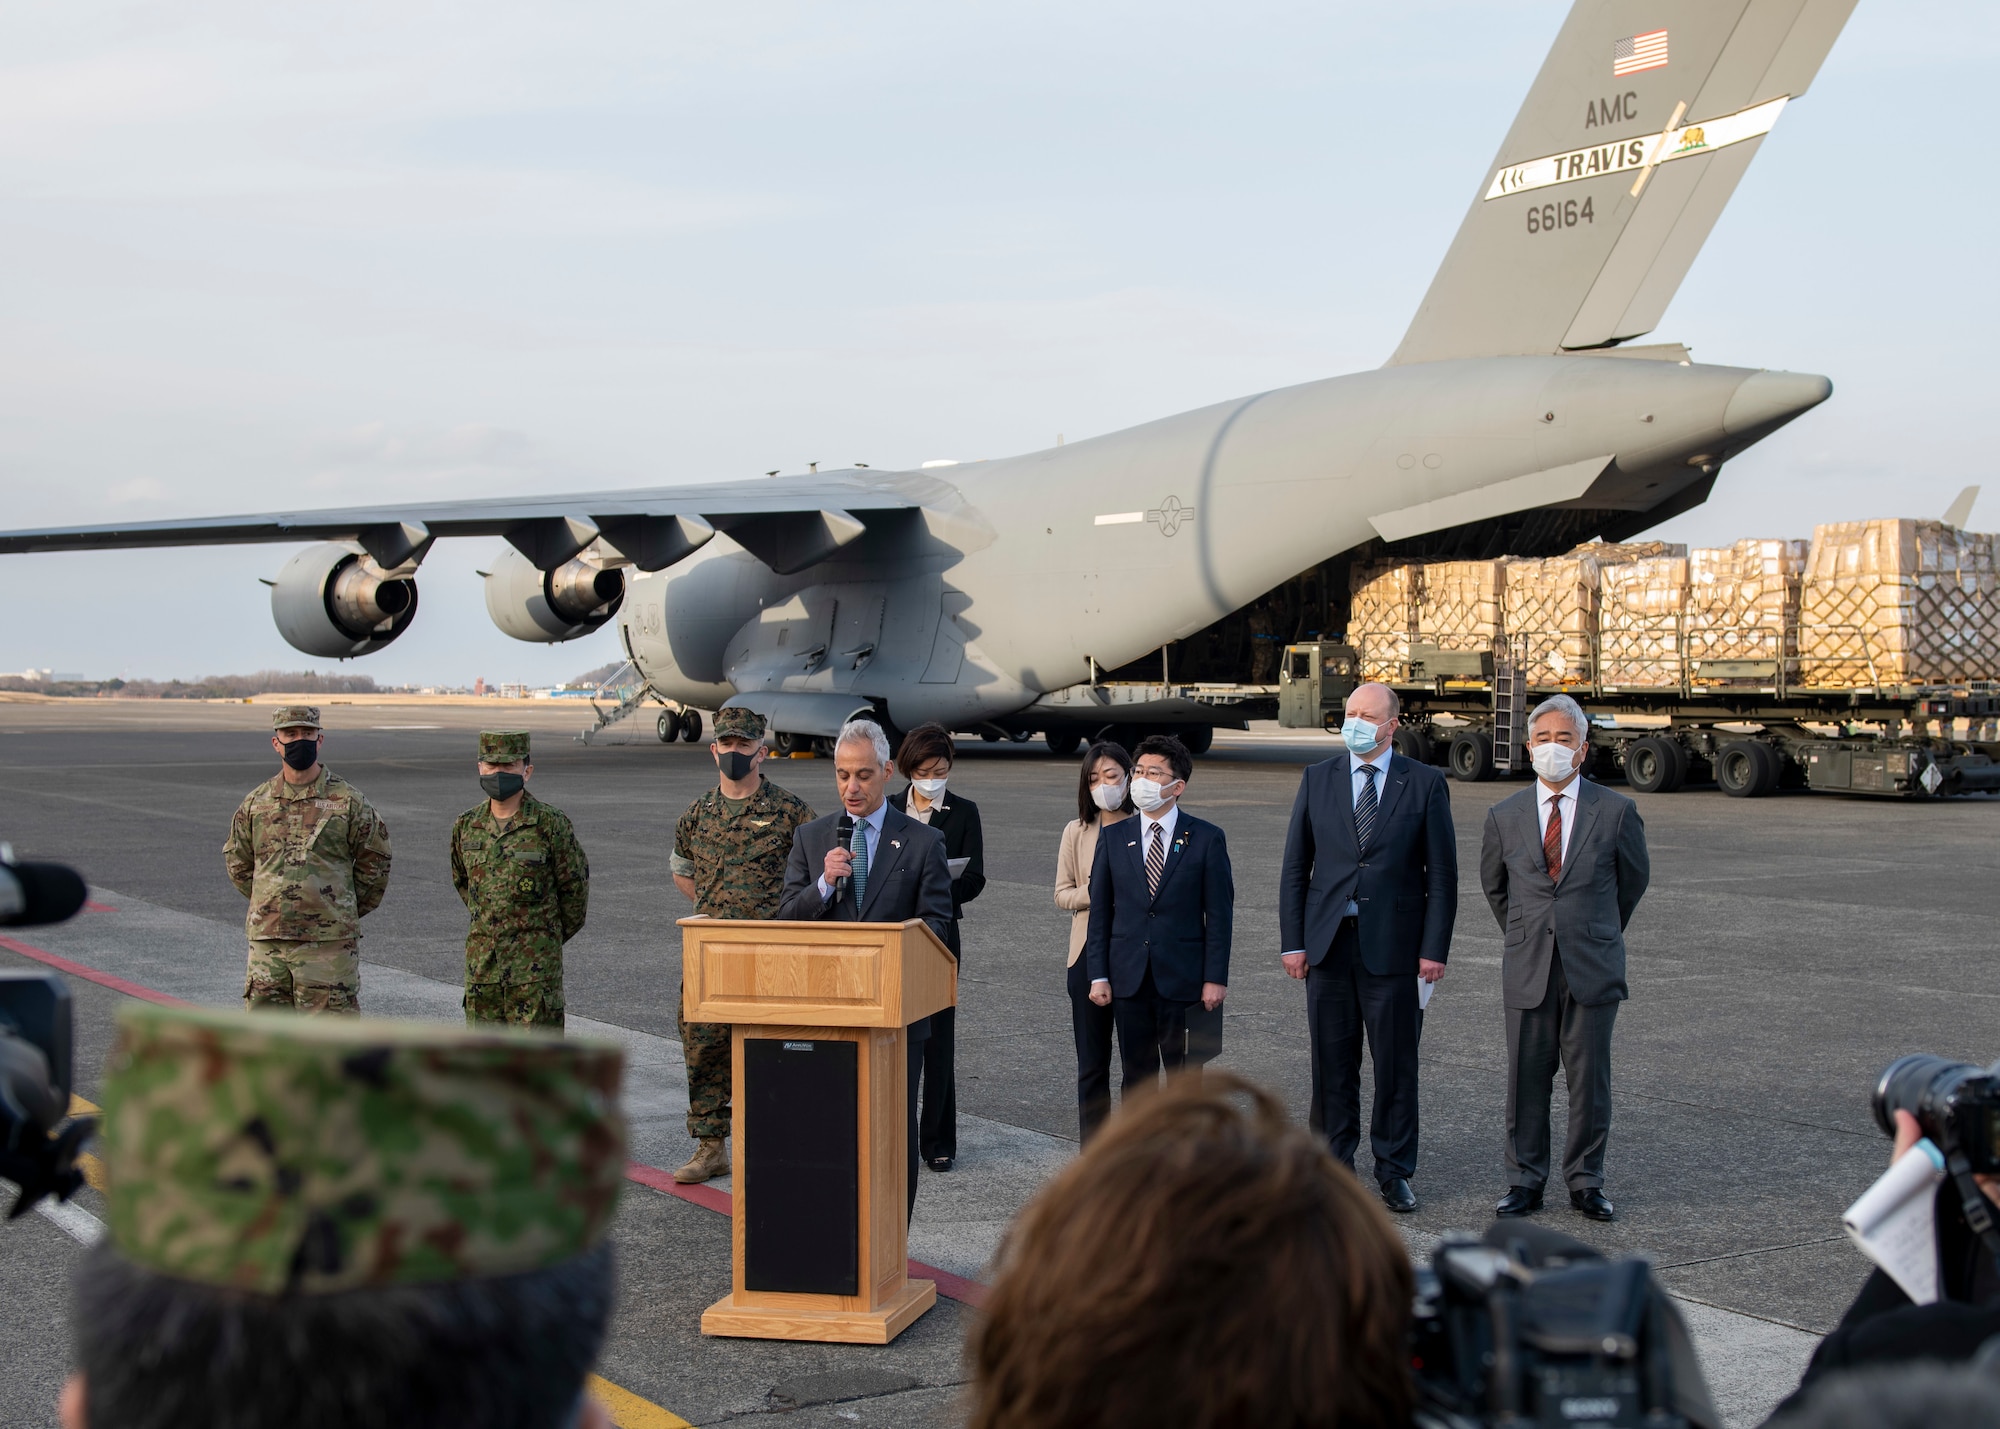 A politician speaks to a crowd gathered in front of a military cargo aircraft.